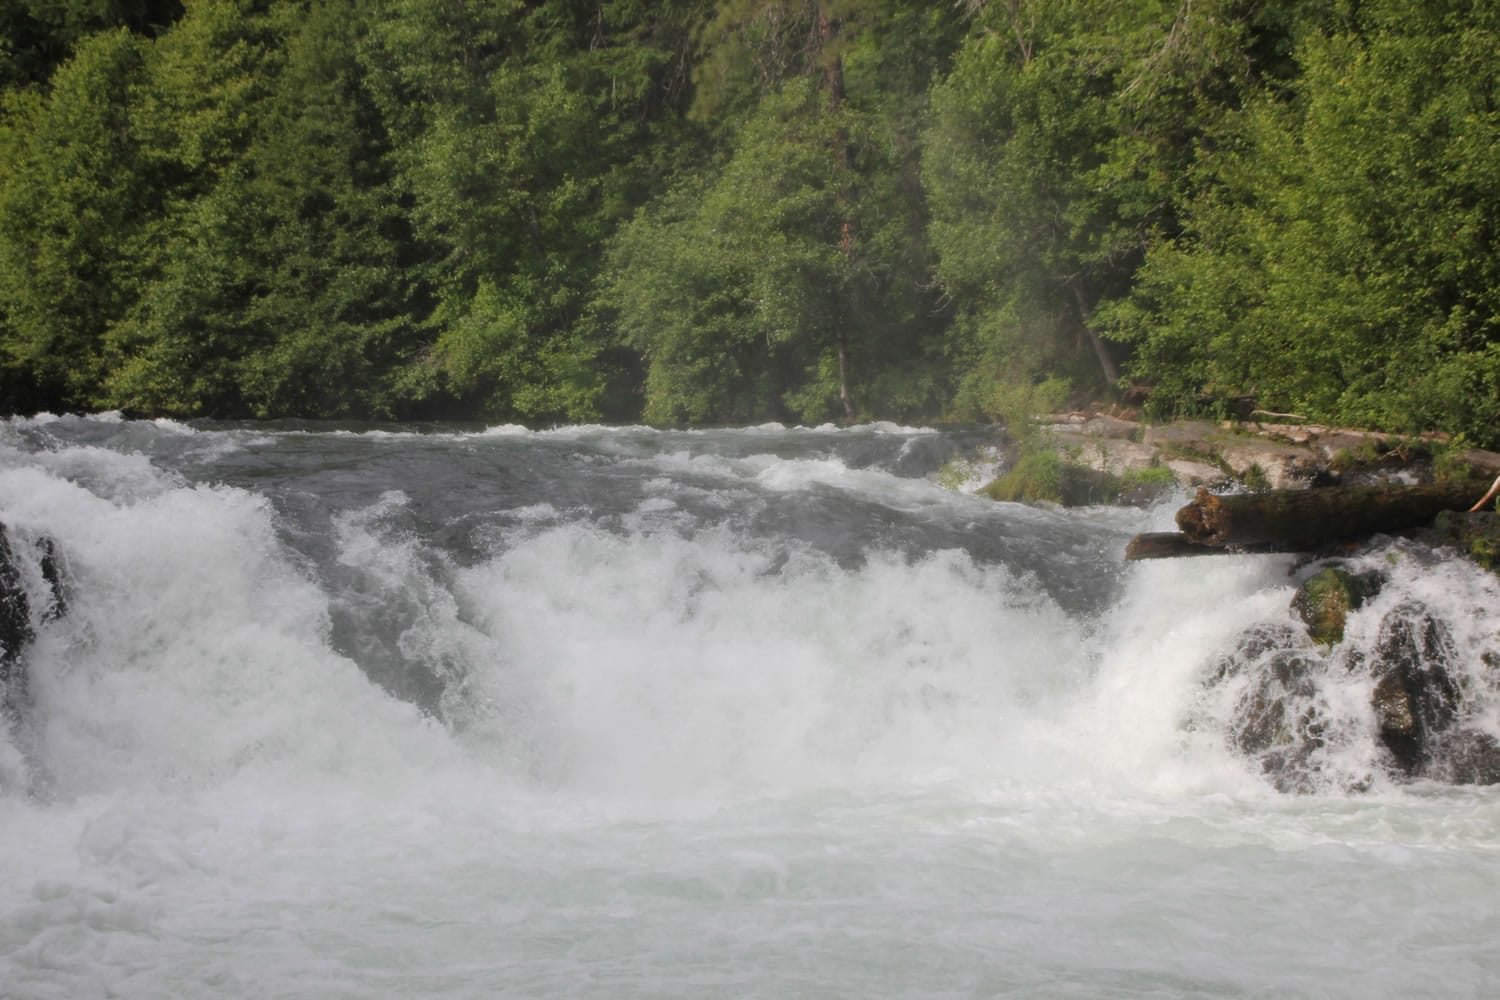 Fall chinook salmon are not expected to go upstream beyond Husum Falls at river mile 7.6.